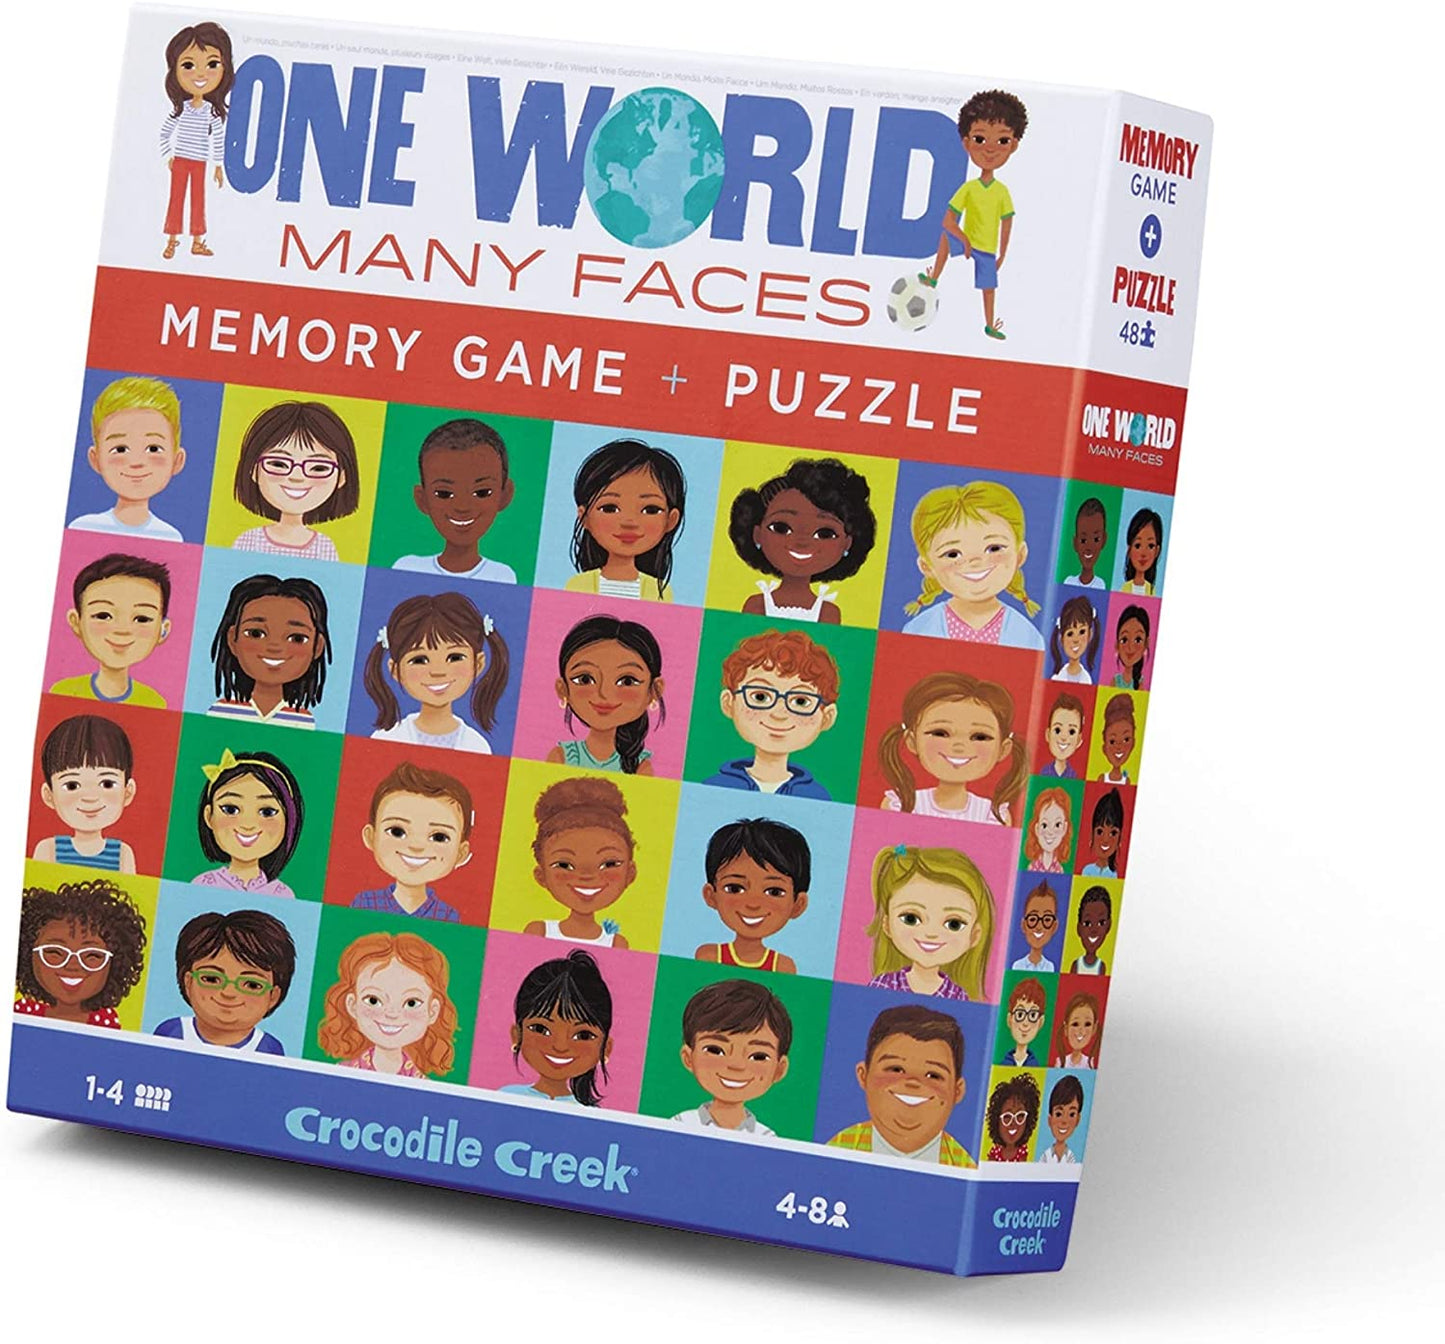 Memory Game & Puzzle-One World, Many Faces